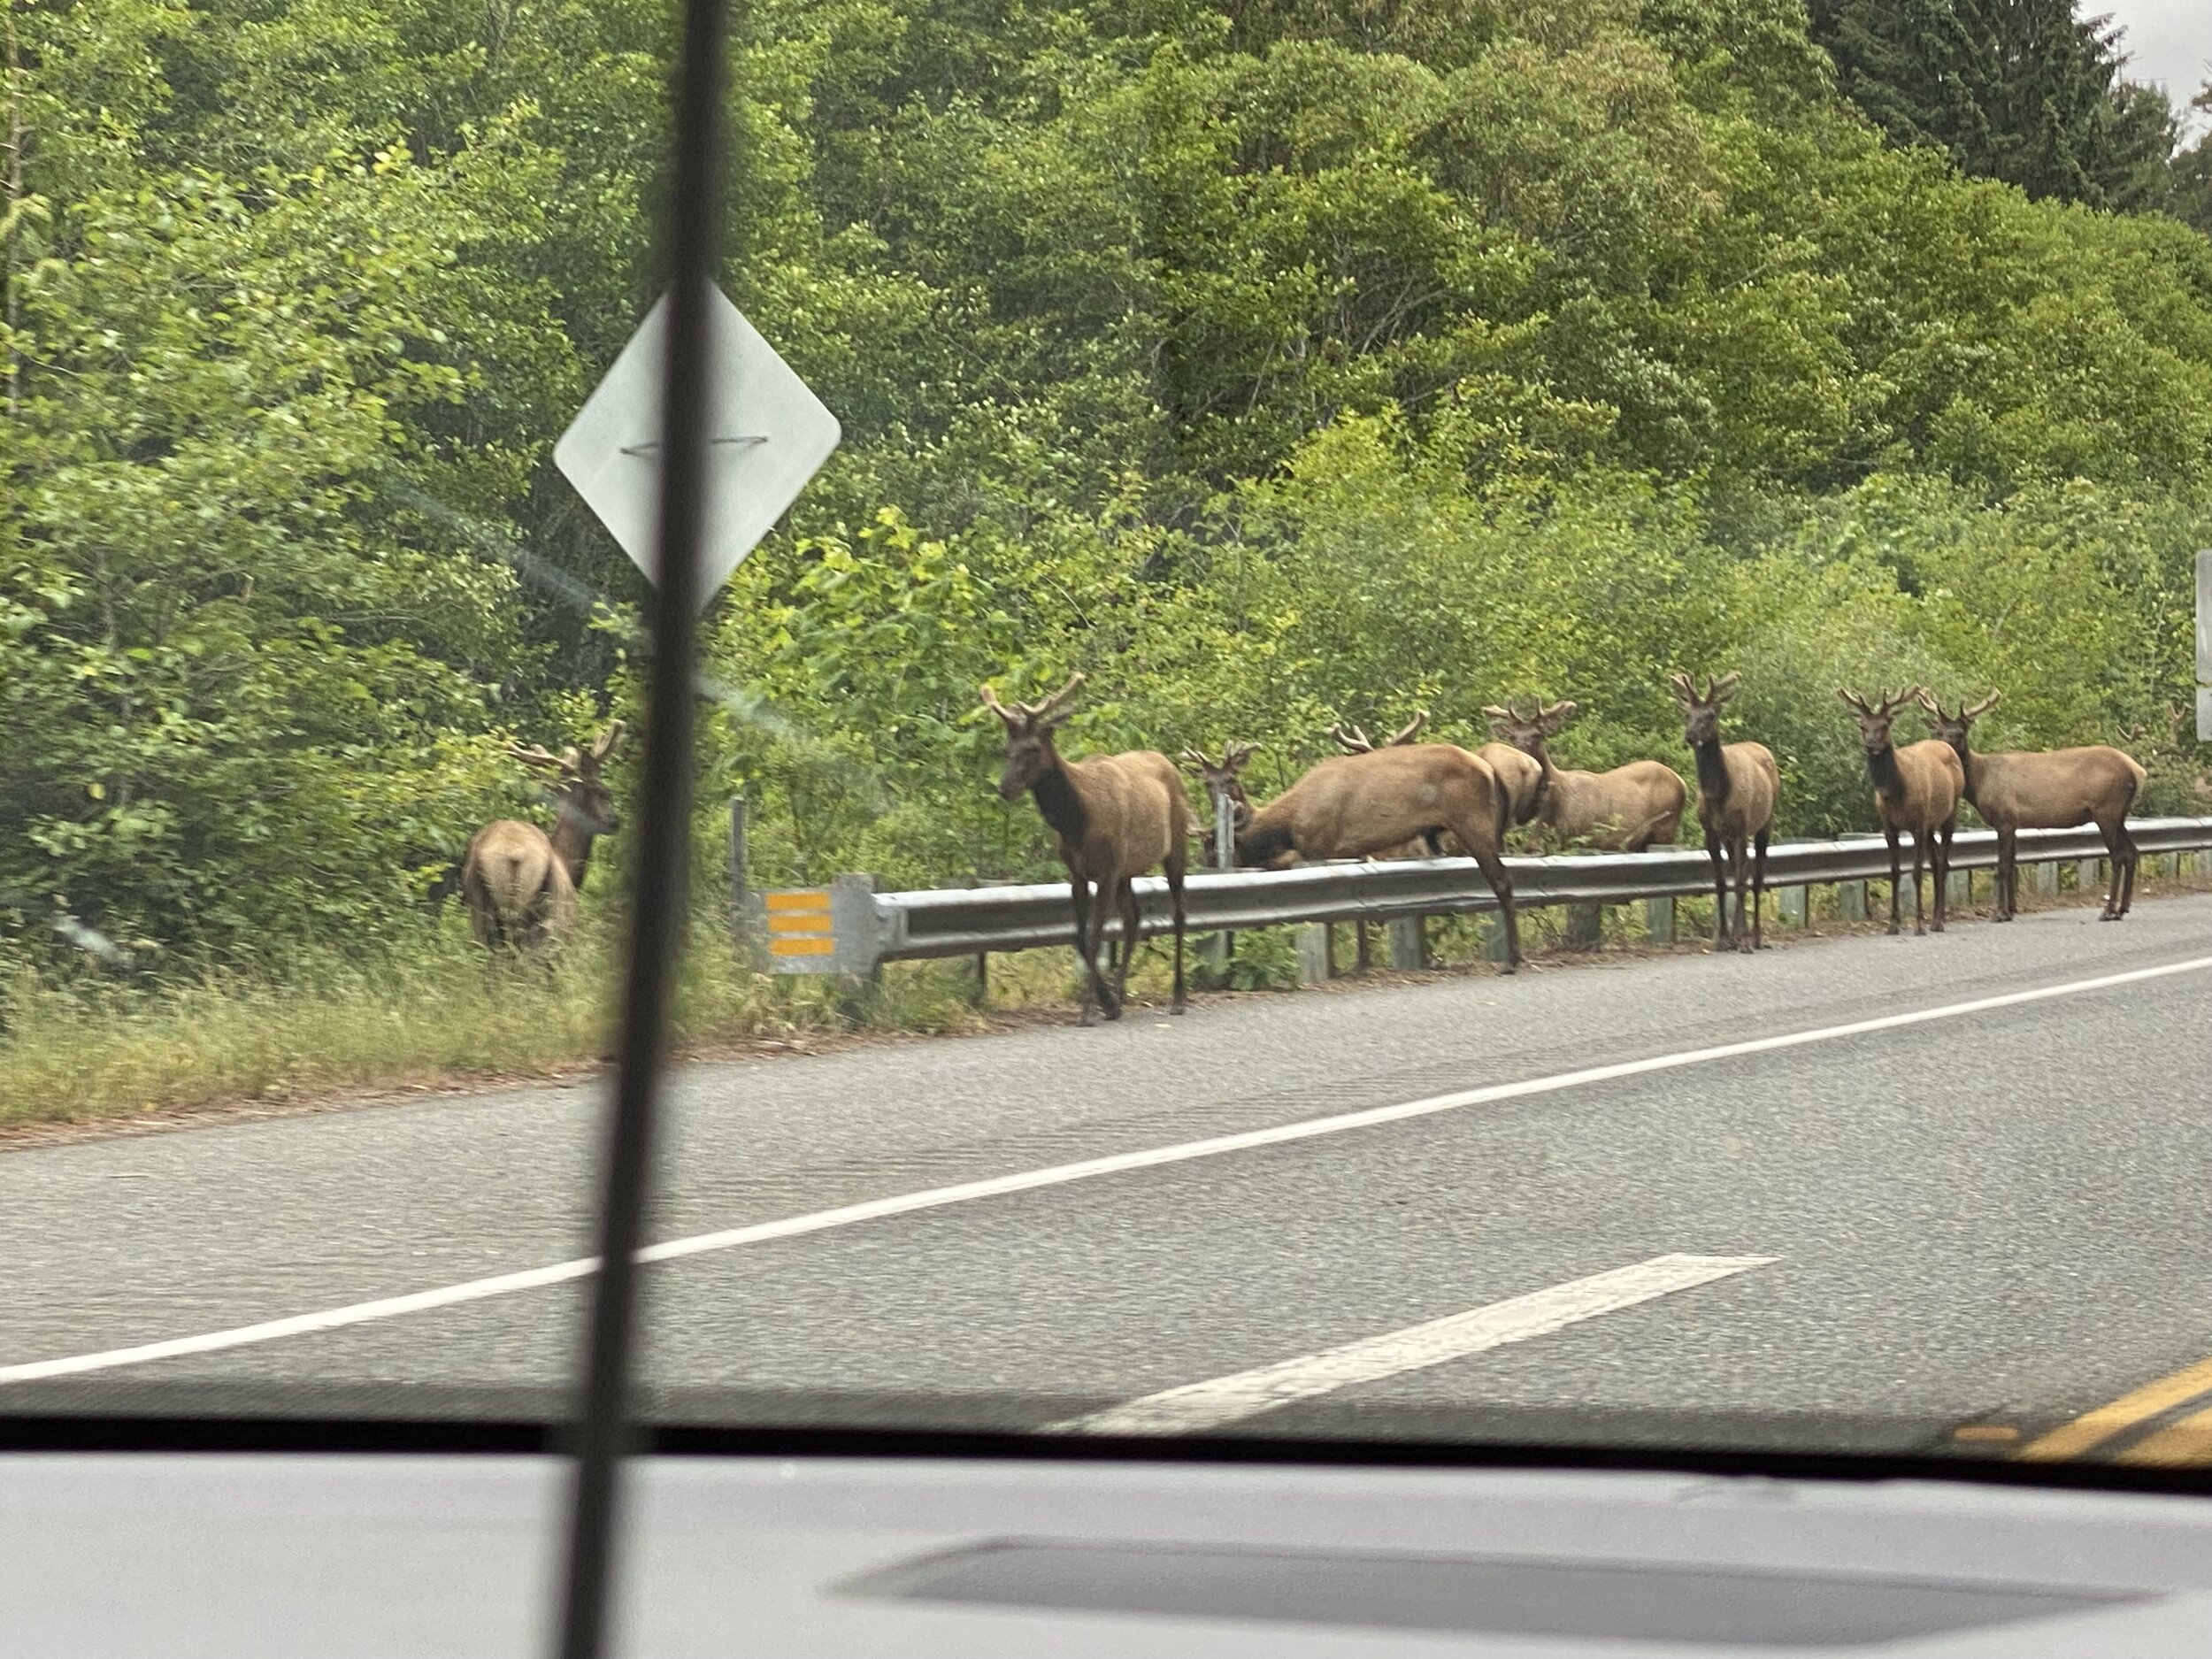 Young, male, Roosevelt Elk casually step right over the guard rail along the road.  Photo by Karen Boudreaux, June 13, 2021